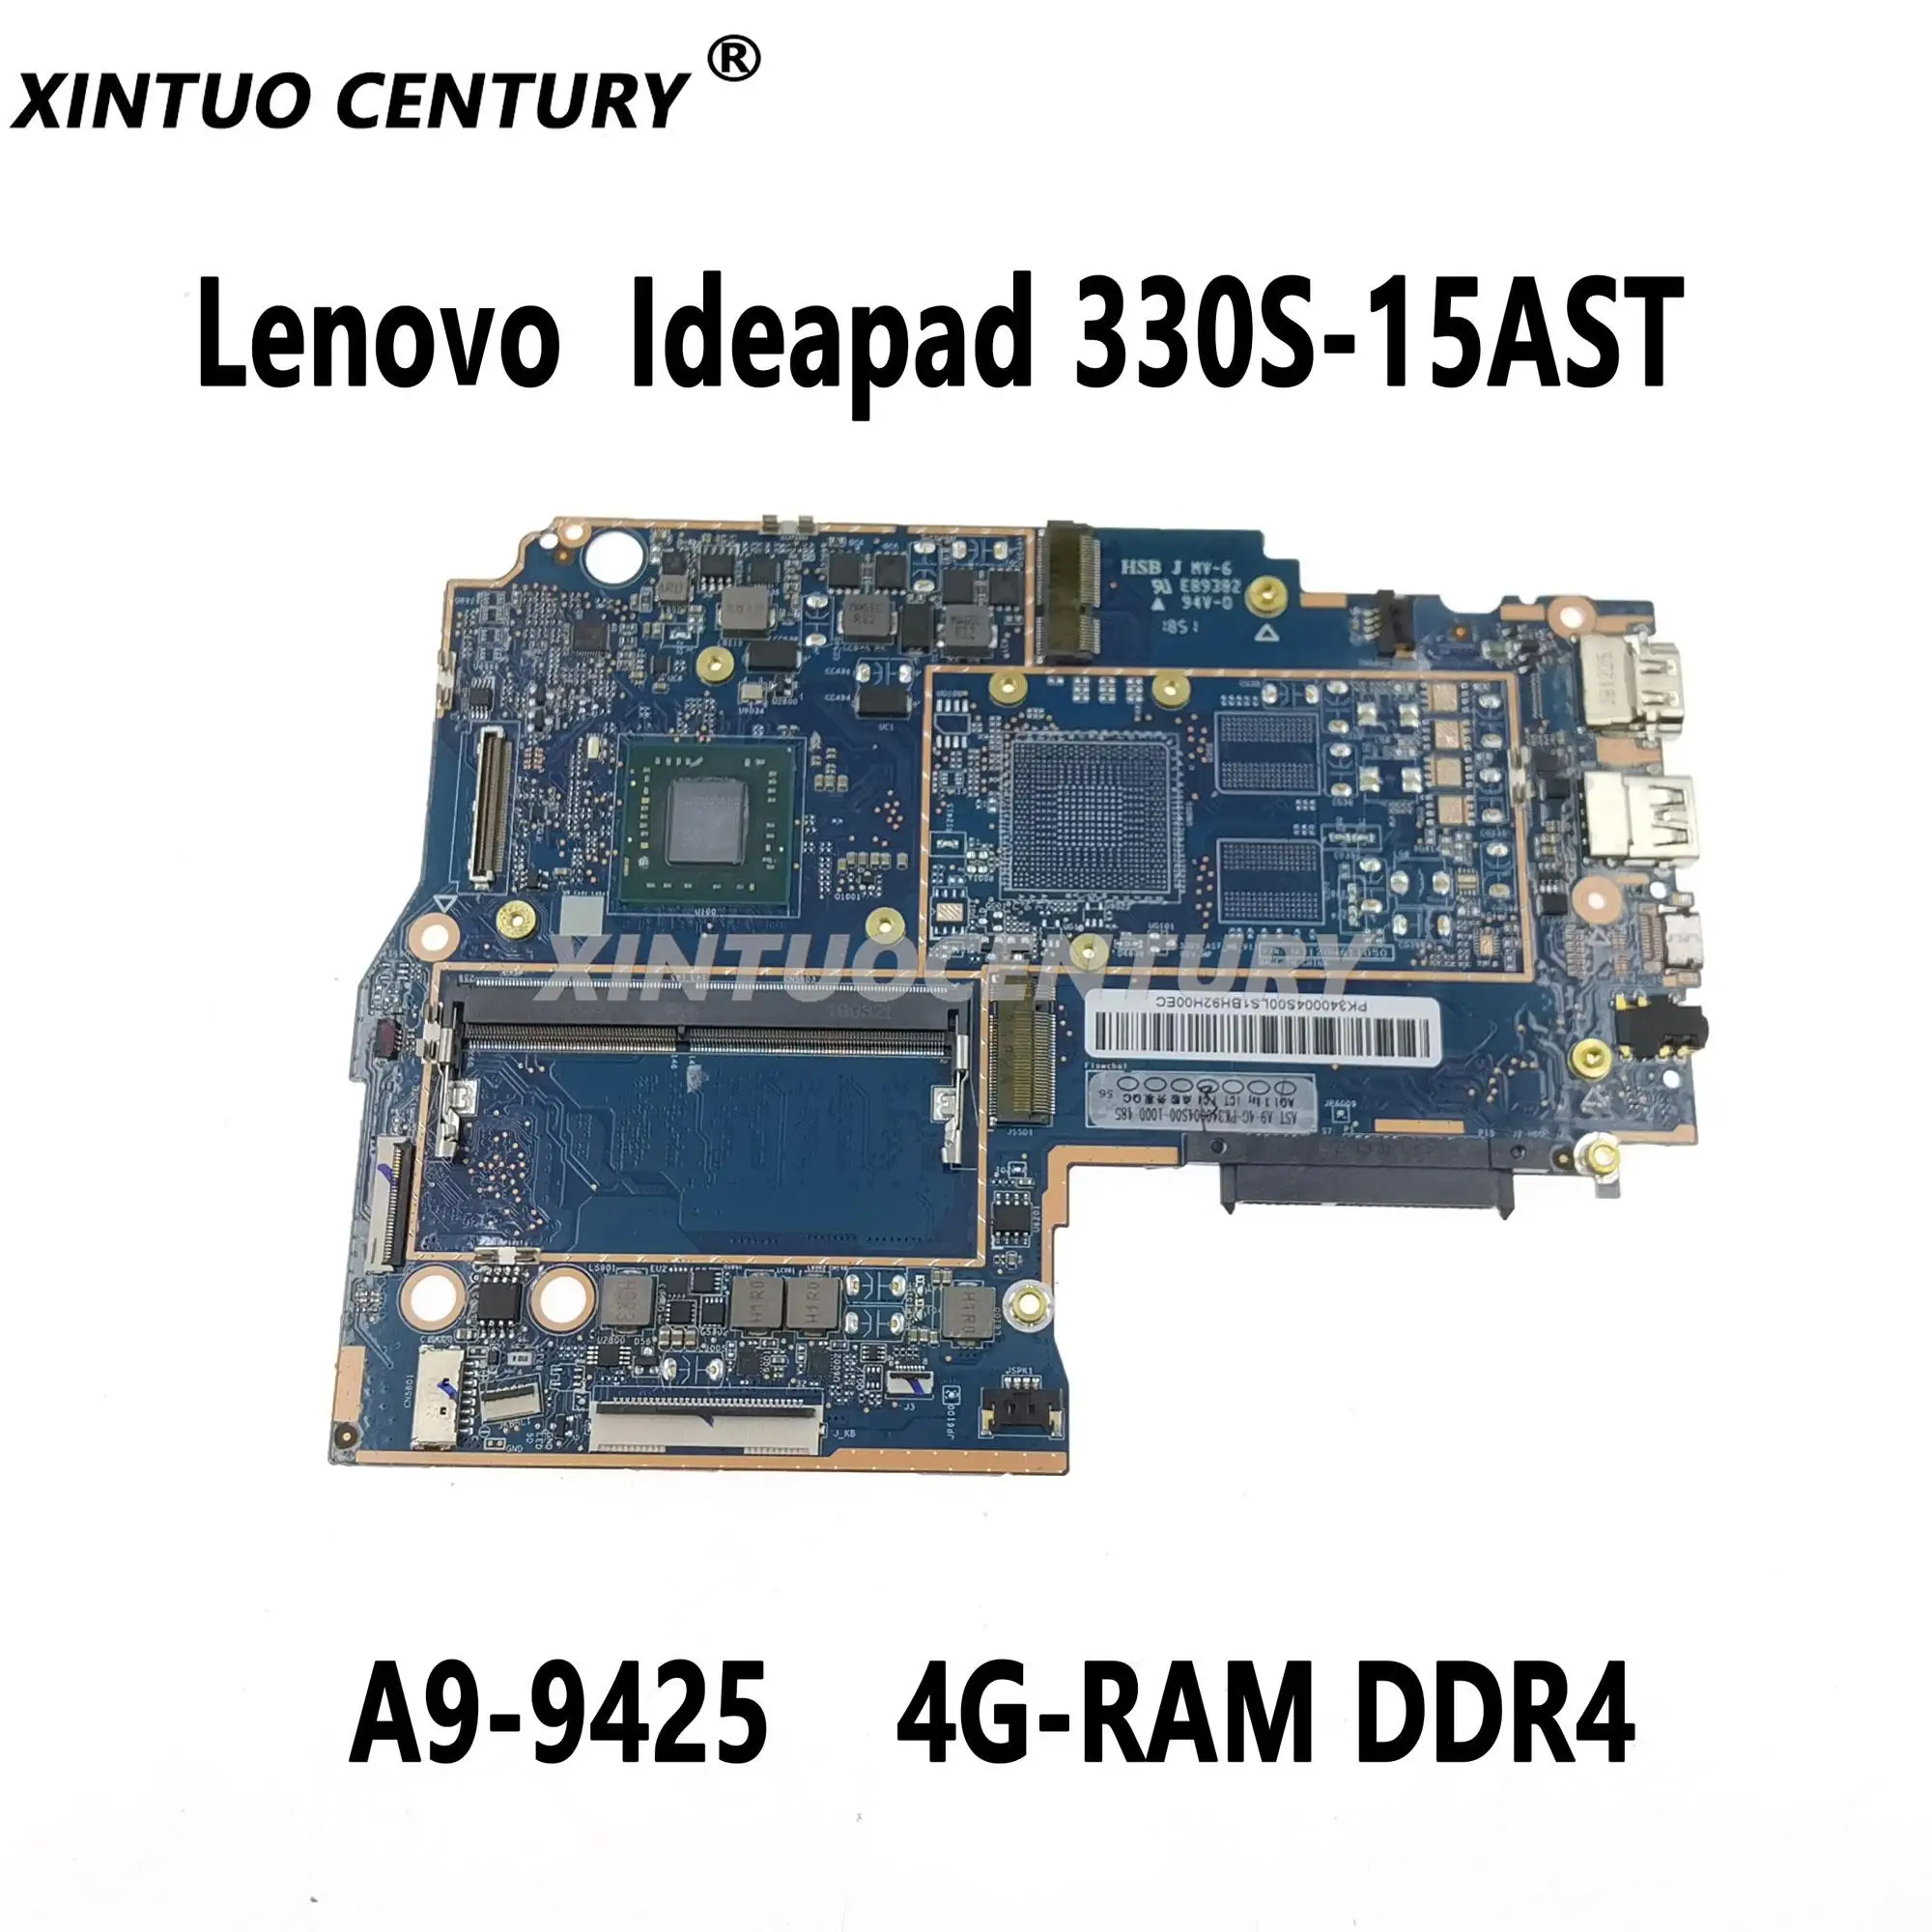 

For Lenovo Ideapad 330S-15AST Laptop Motherboard MB 3N81F9 CPU A9-9425 AMD 4G-RAM DDR4 100% Test Work